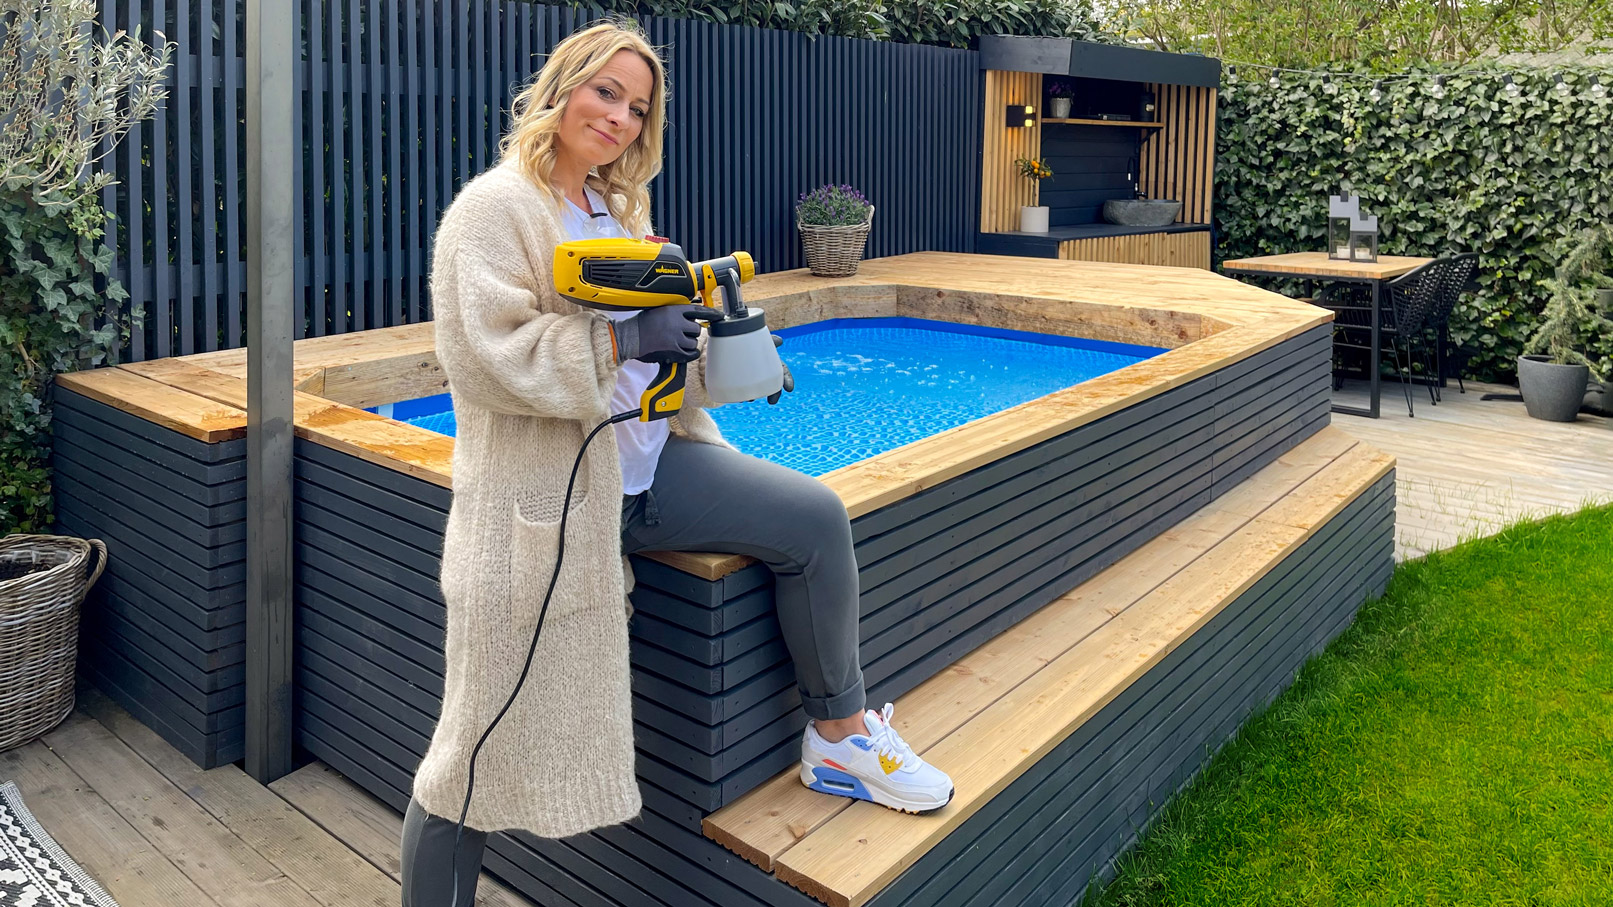 Aneta with paint sprayer in front of pool surround